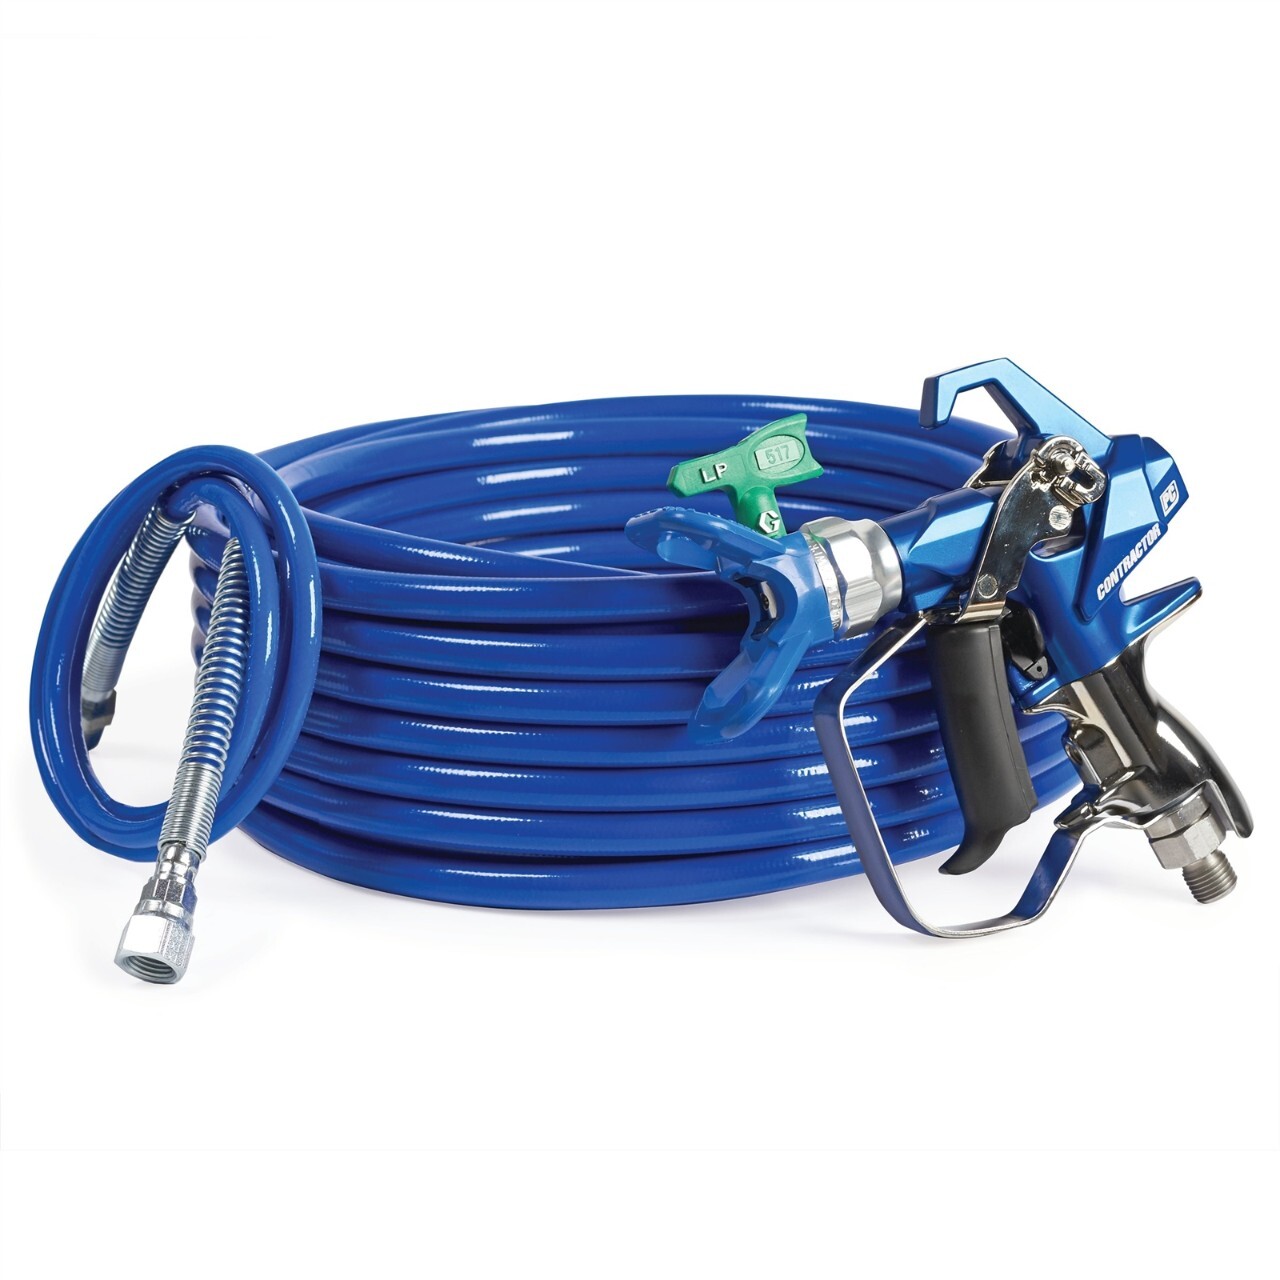 Graco Contractor PC Compact Gun, 1/4 in Airless Hose